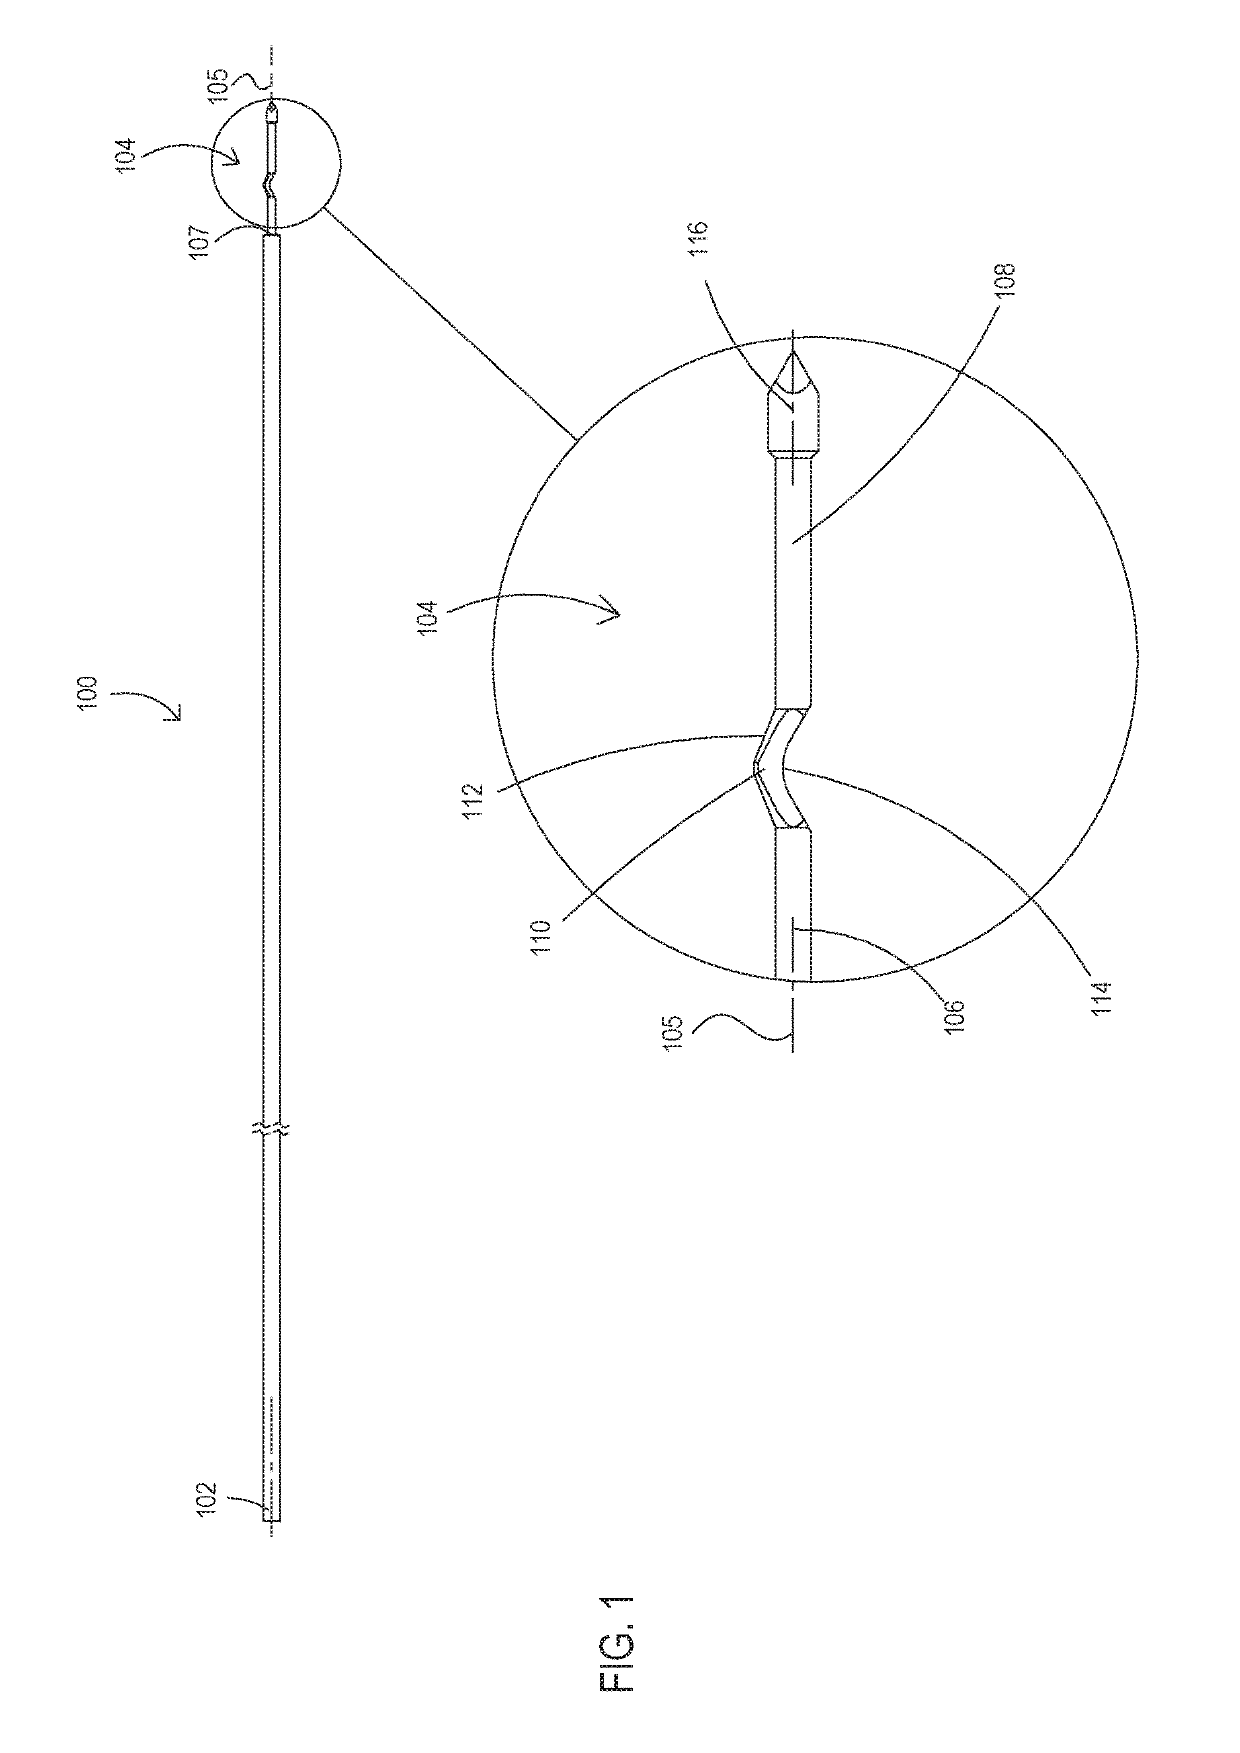 Bone material removal device and a method for use thereof